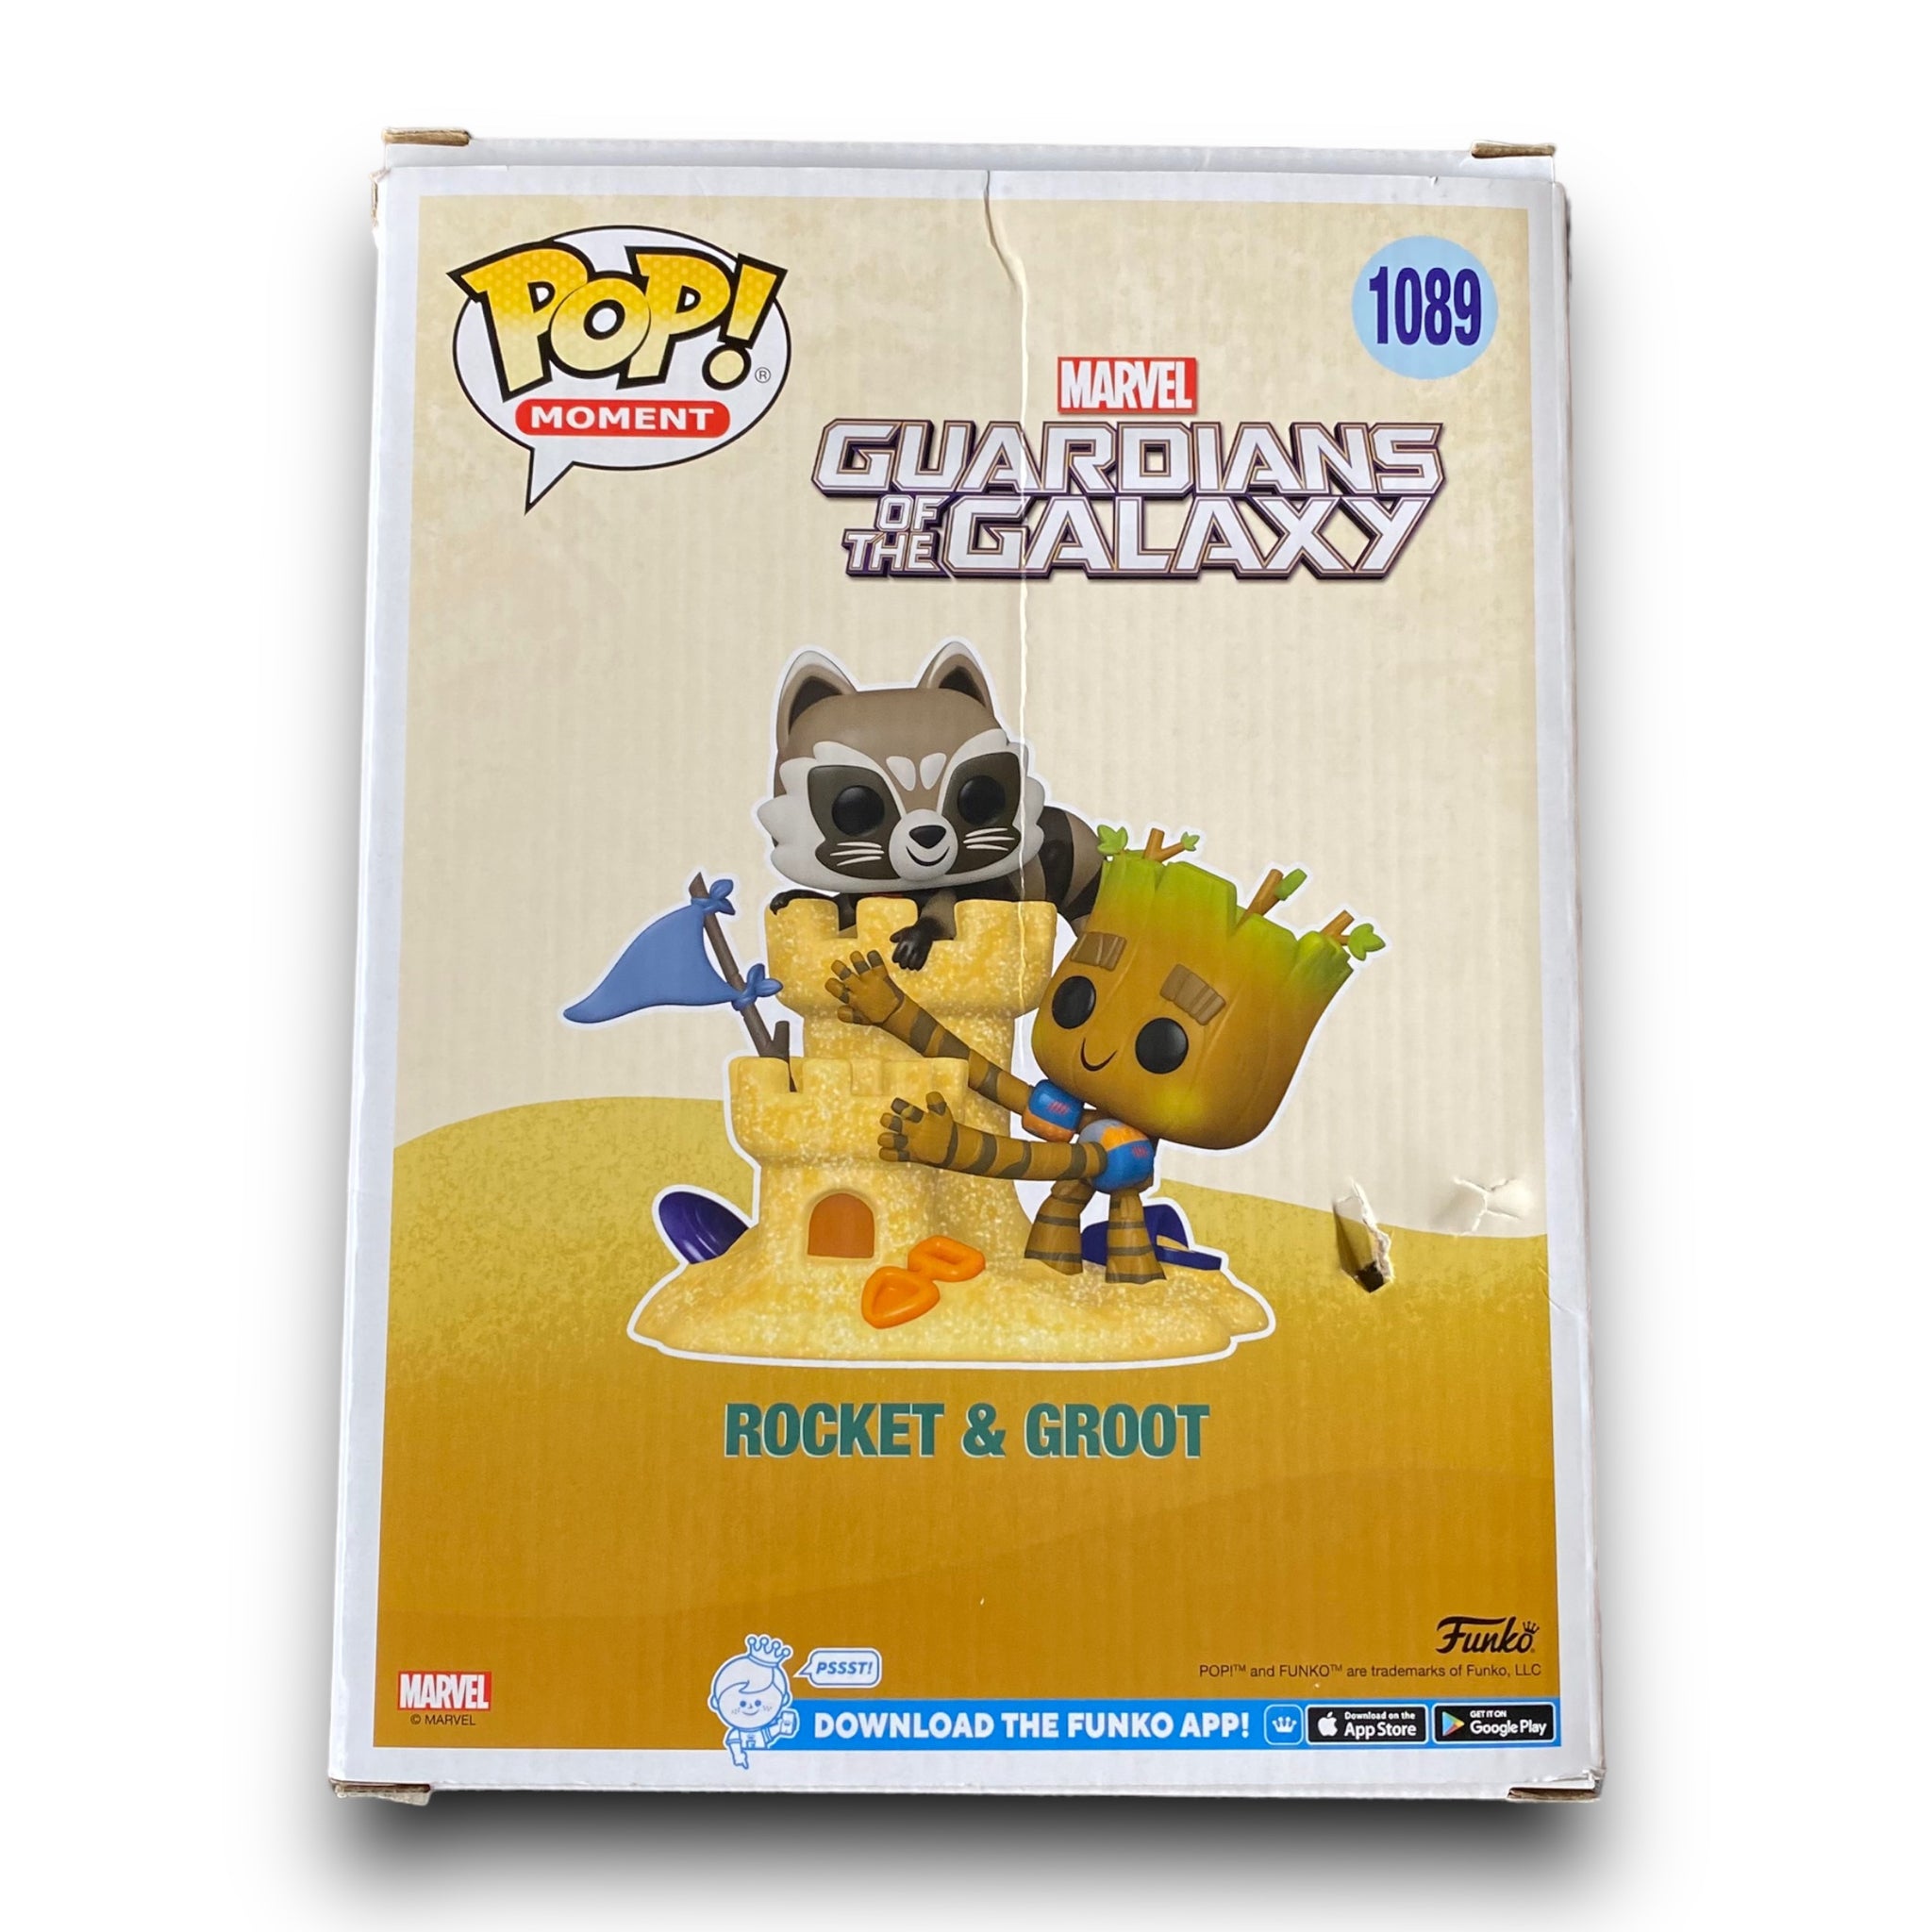 Brand New Funko Pop! Moment Rocket & Groot Marvel Guardians of the